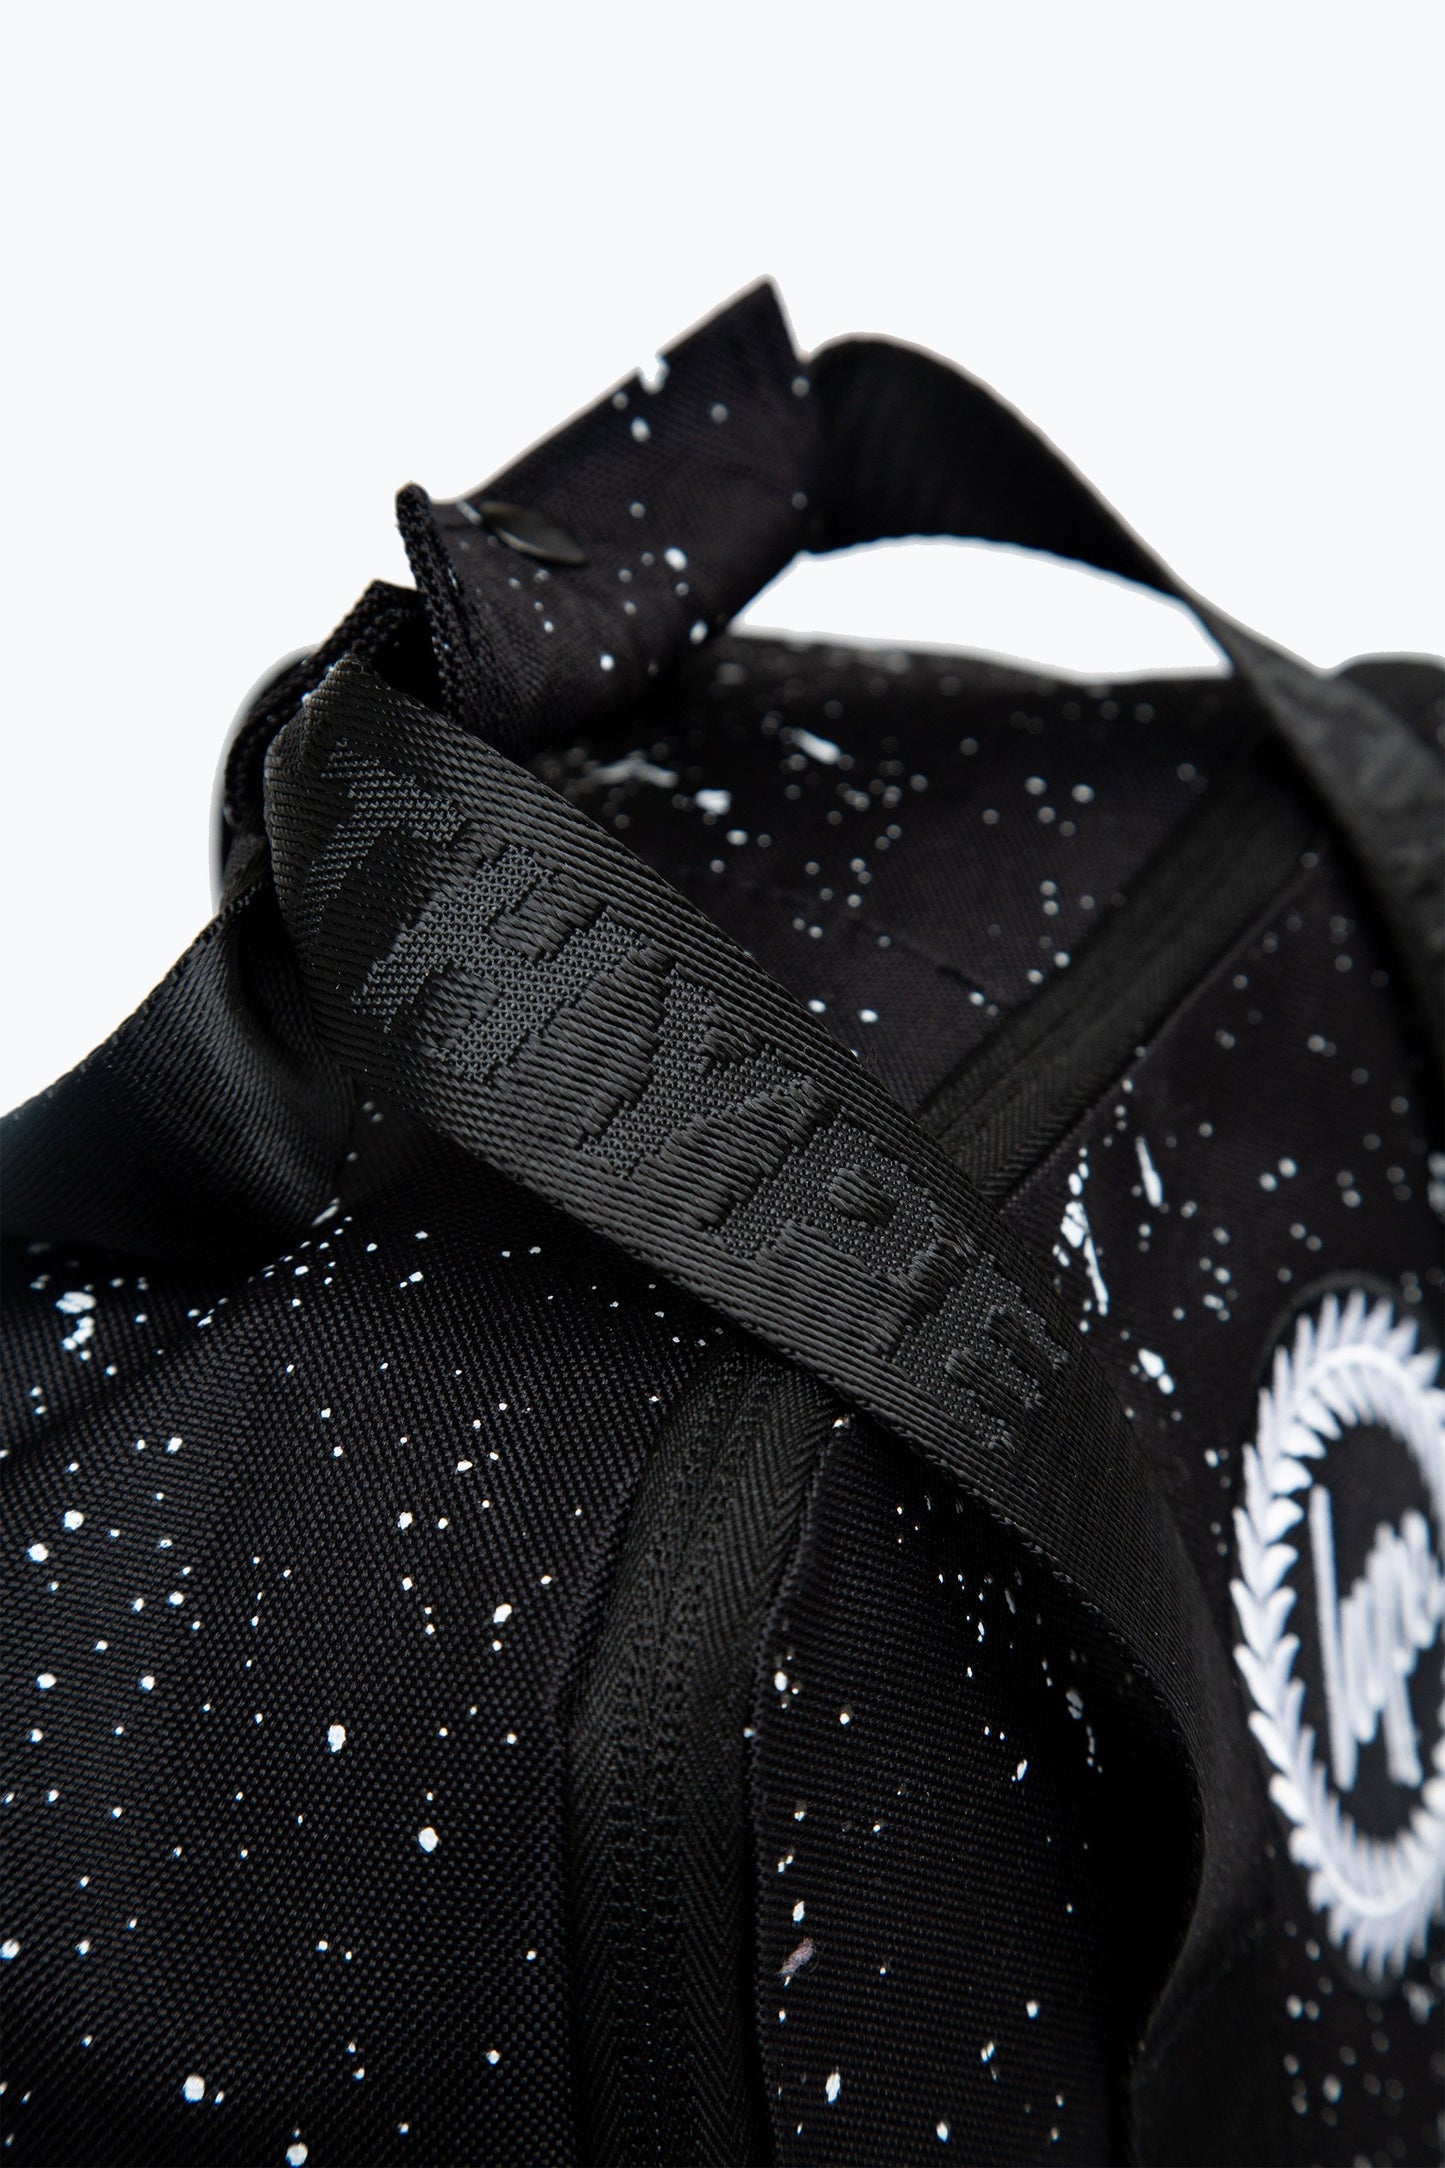 HYPE BLACK SPECKLE BOXY BACKPACK